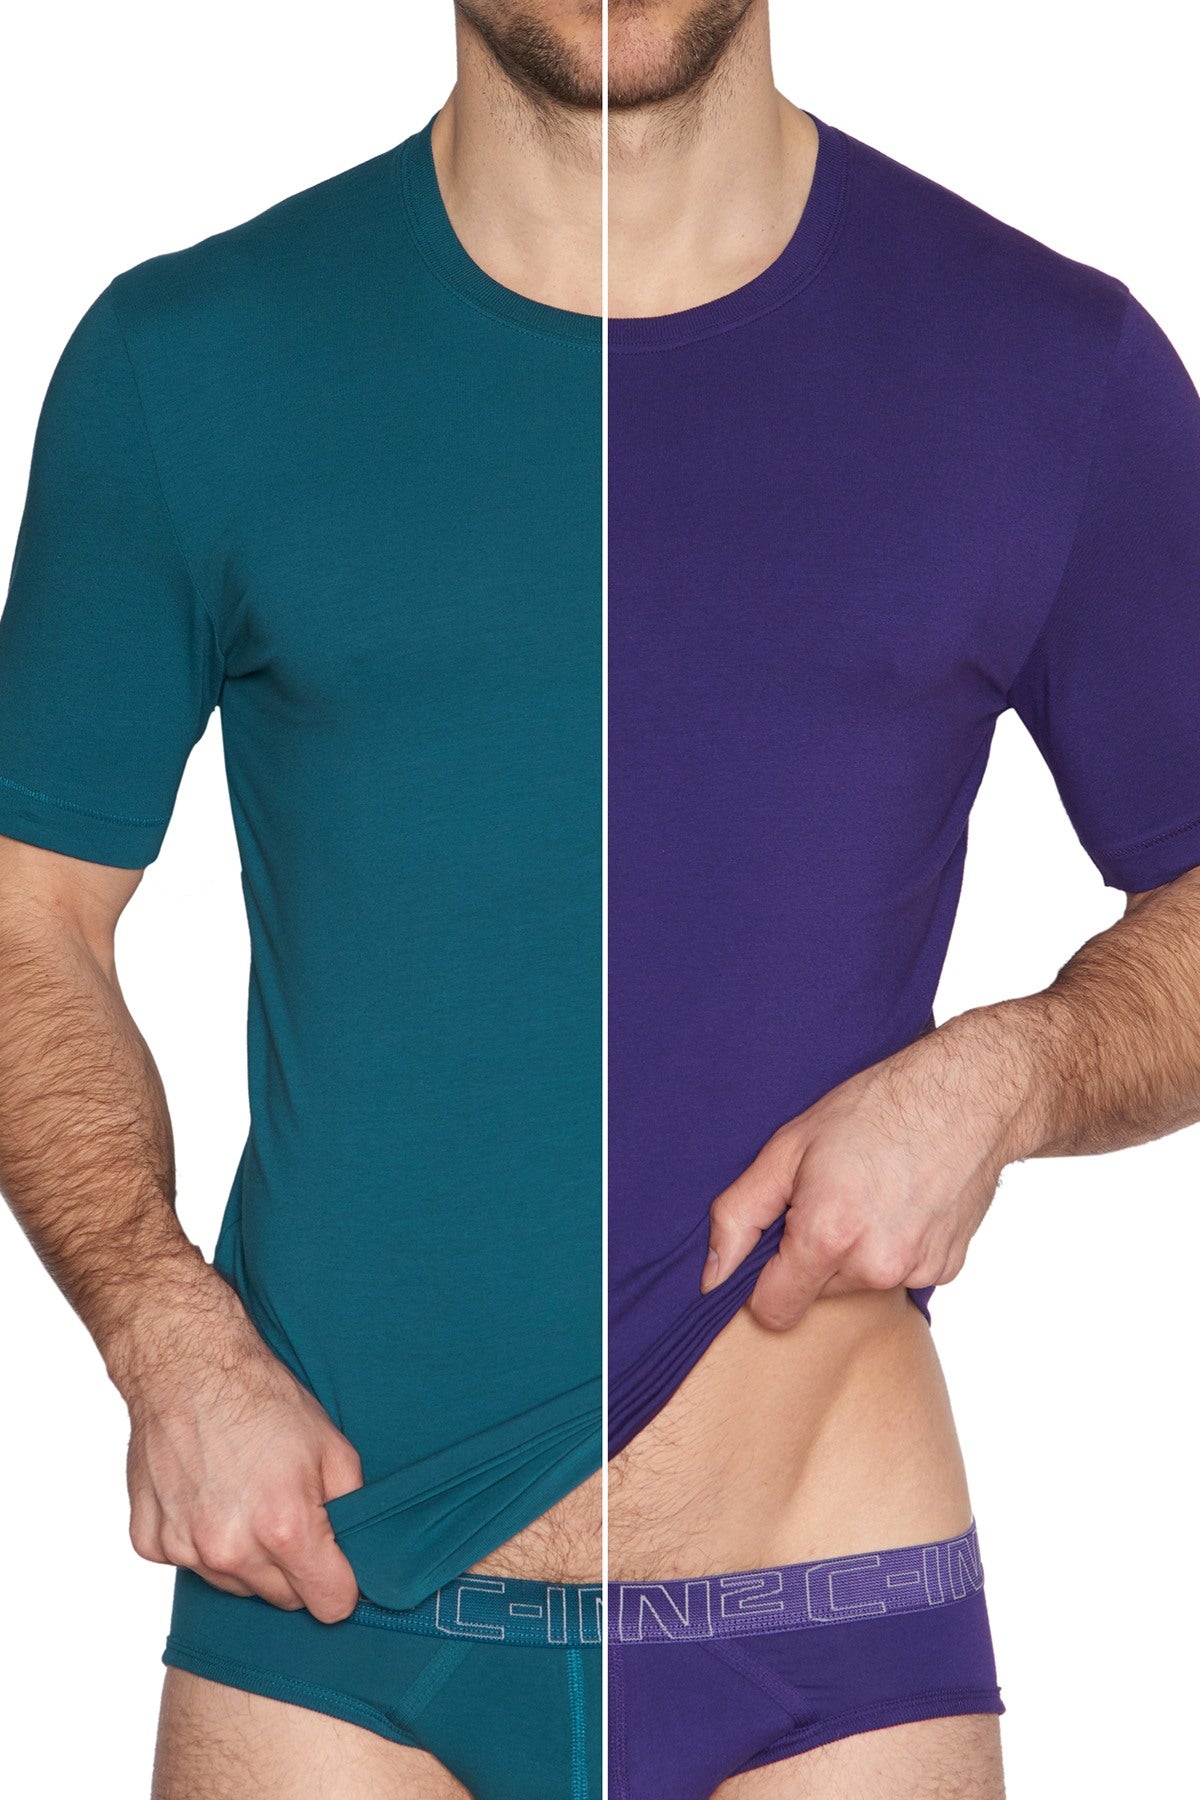 C-IN2 Tanager-Teal/Purple-Label Crewneck Tee 2-Pack